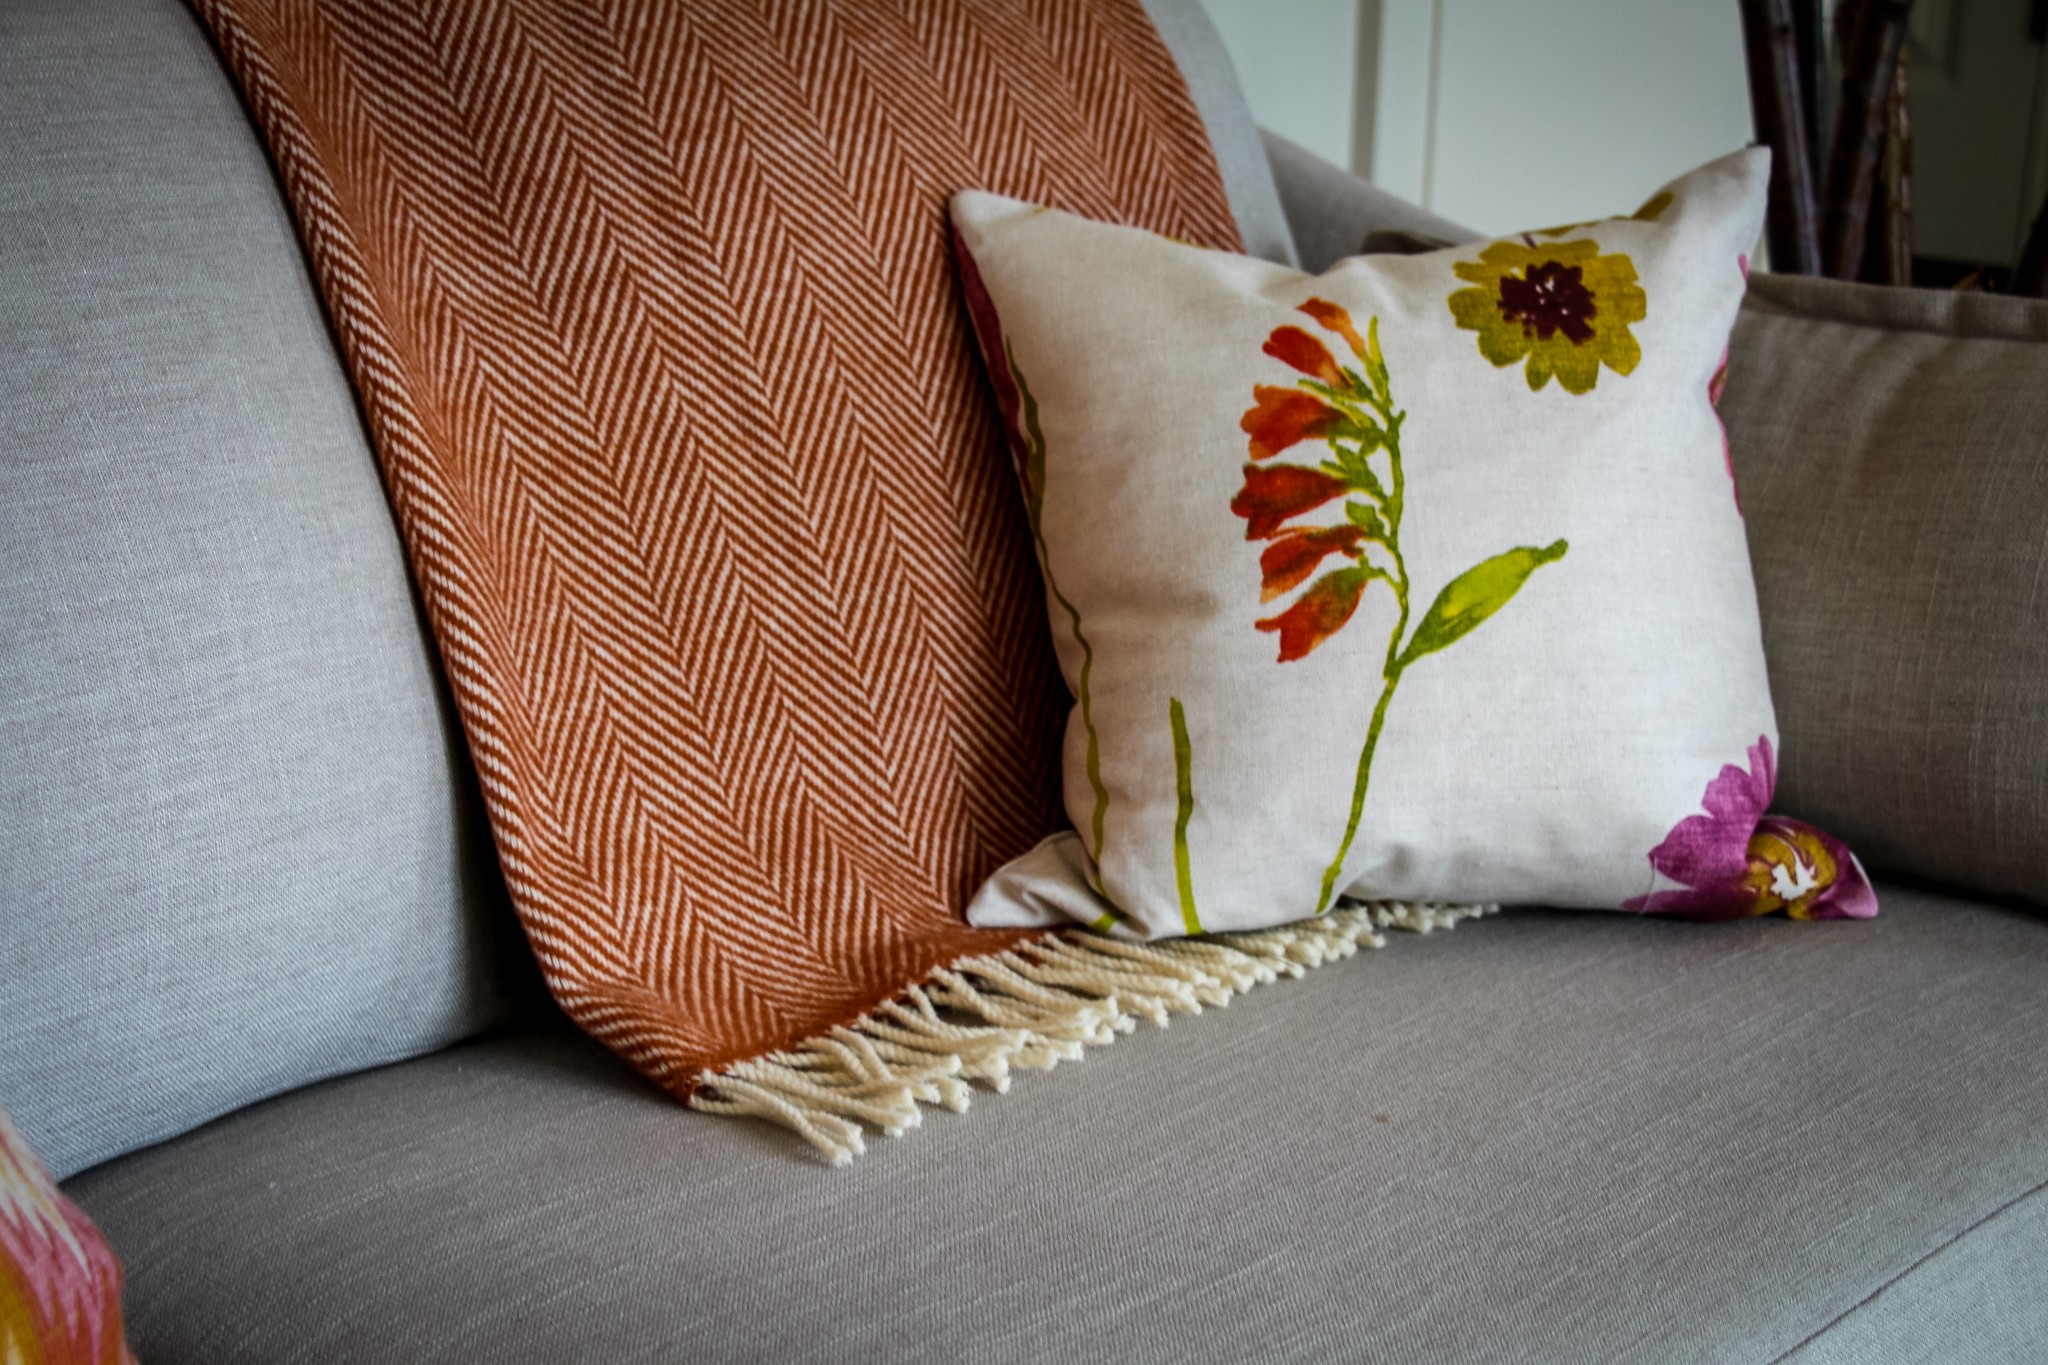 On a neutral gray sofa, a floral pillow offers a pop of seasonal colour.